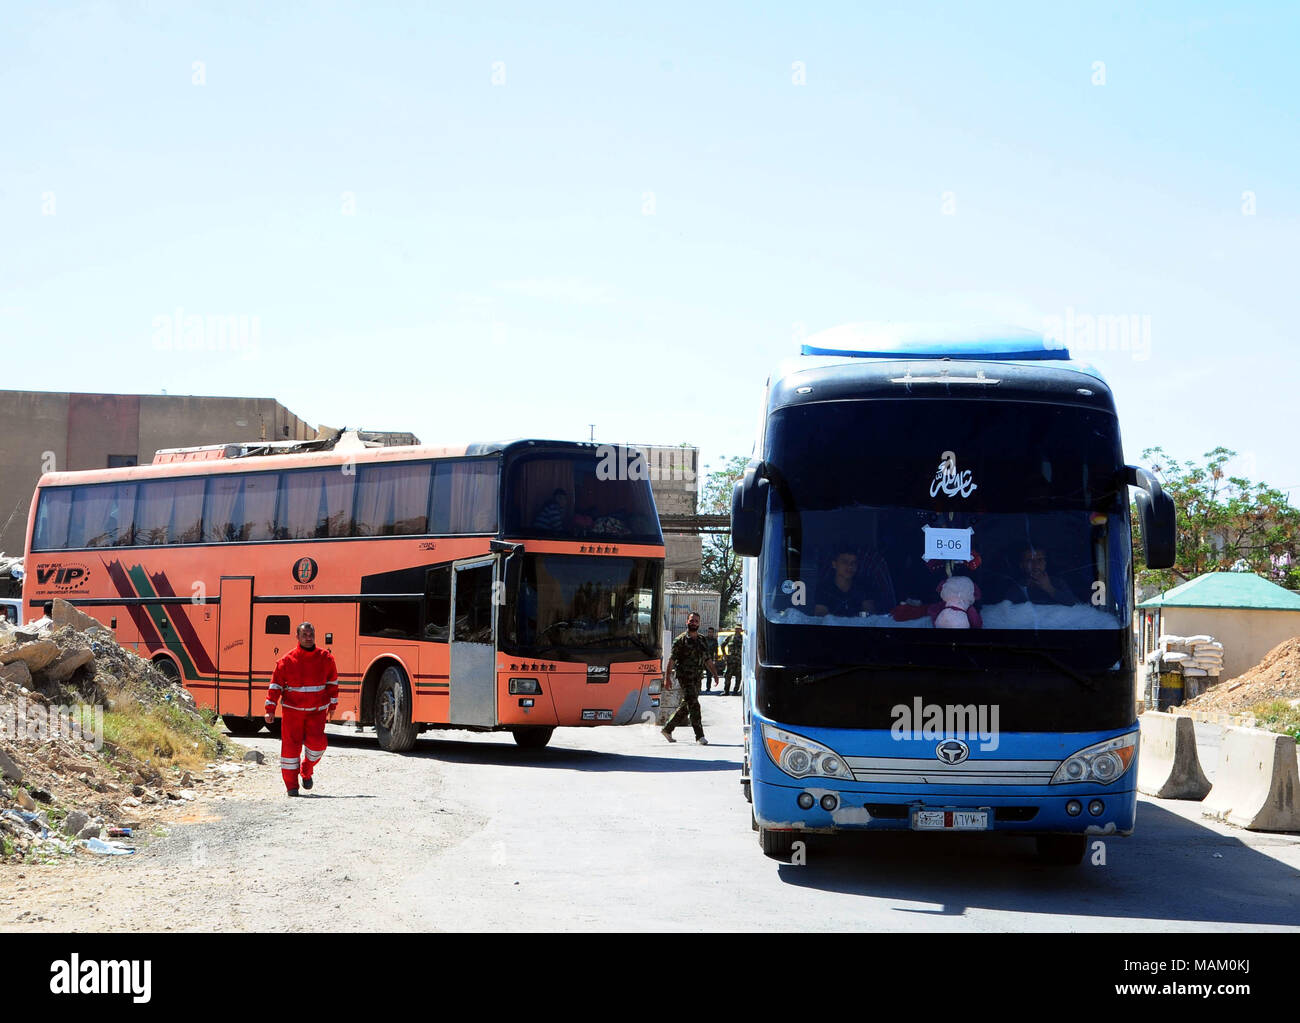 Damascus, Syria. 2nd Apr, 2018. Buses transporting militants of the Islam Army and their families leave the district of Douma in Eastern Ghouta through a crossing point in Wafideen area, northeast of Damascus, Syria, on April 2, 2018. Some 1,146 militants of the Islam Army and their families departed the Douma district in Eastern Ghouta toward the rebel-held Jarablus city in the north, marking the first batch of this rebel group to evacuate their main stronghold near Damascus, according to the state news agency SANA. Credit: Ammar Safarjalani/Xinhua/Alamy Live News Stock Photo